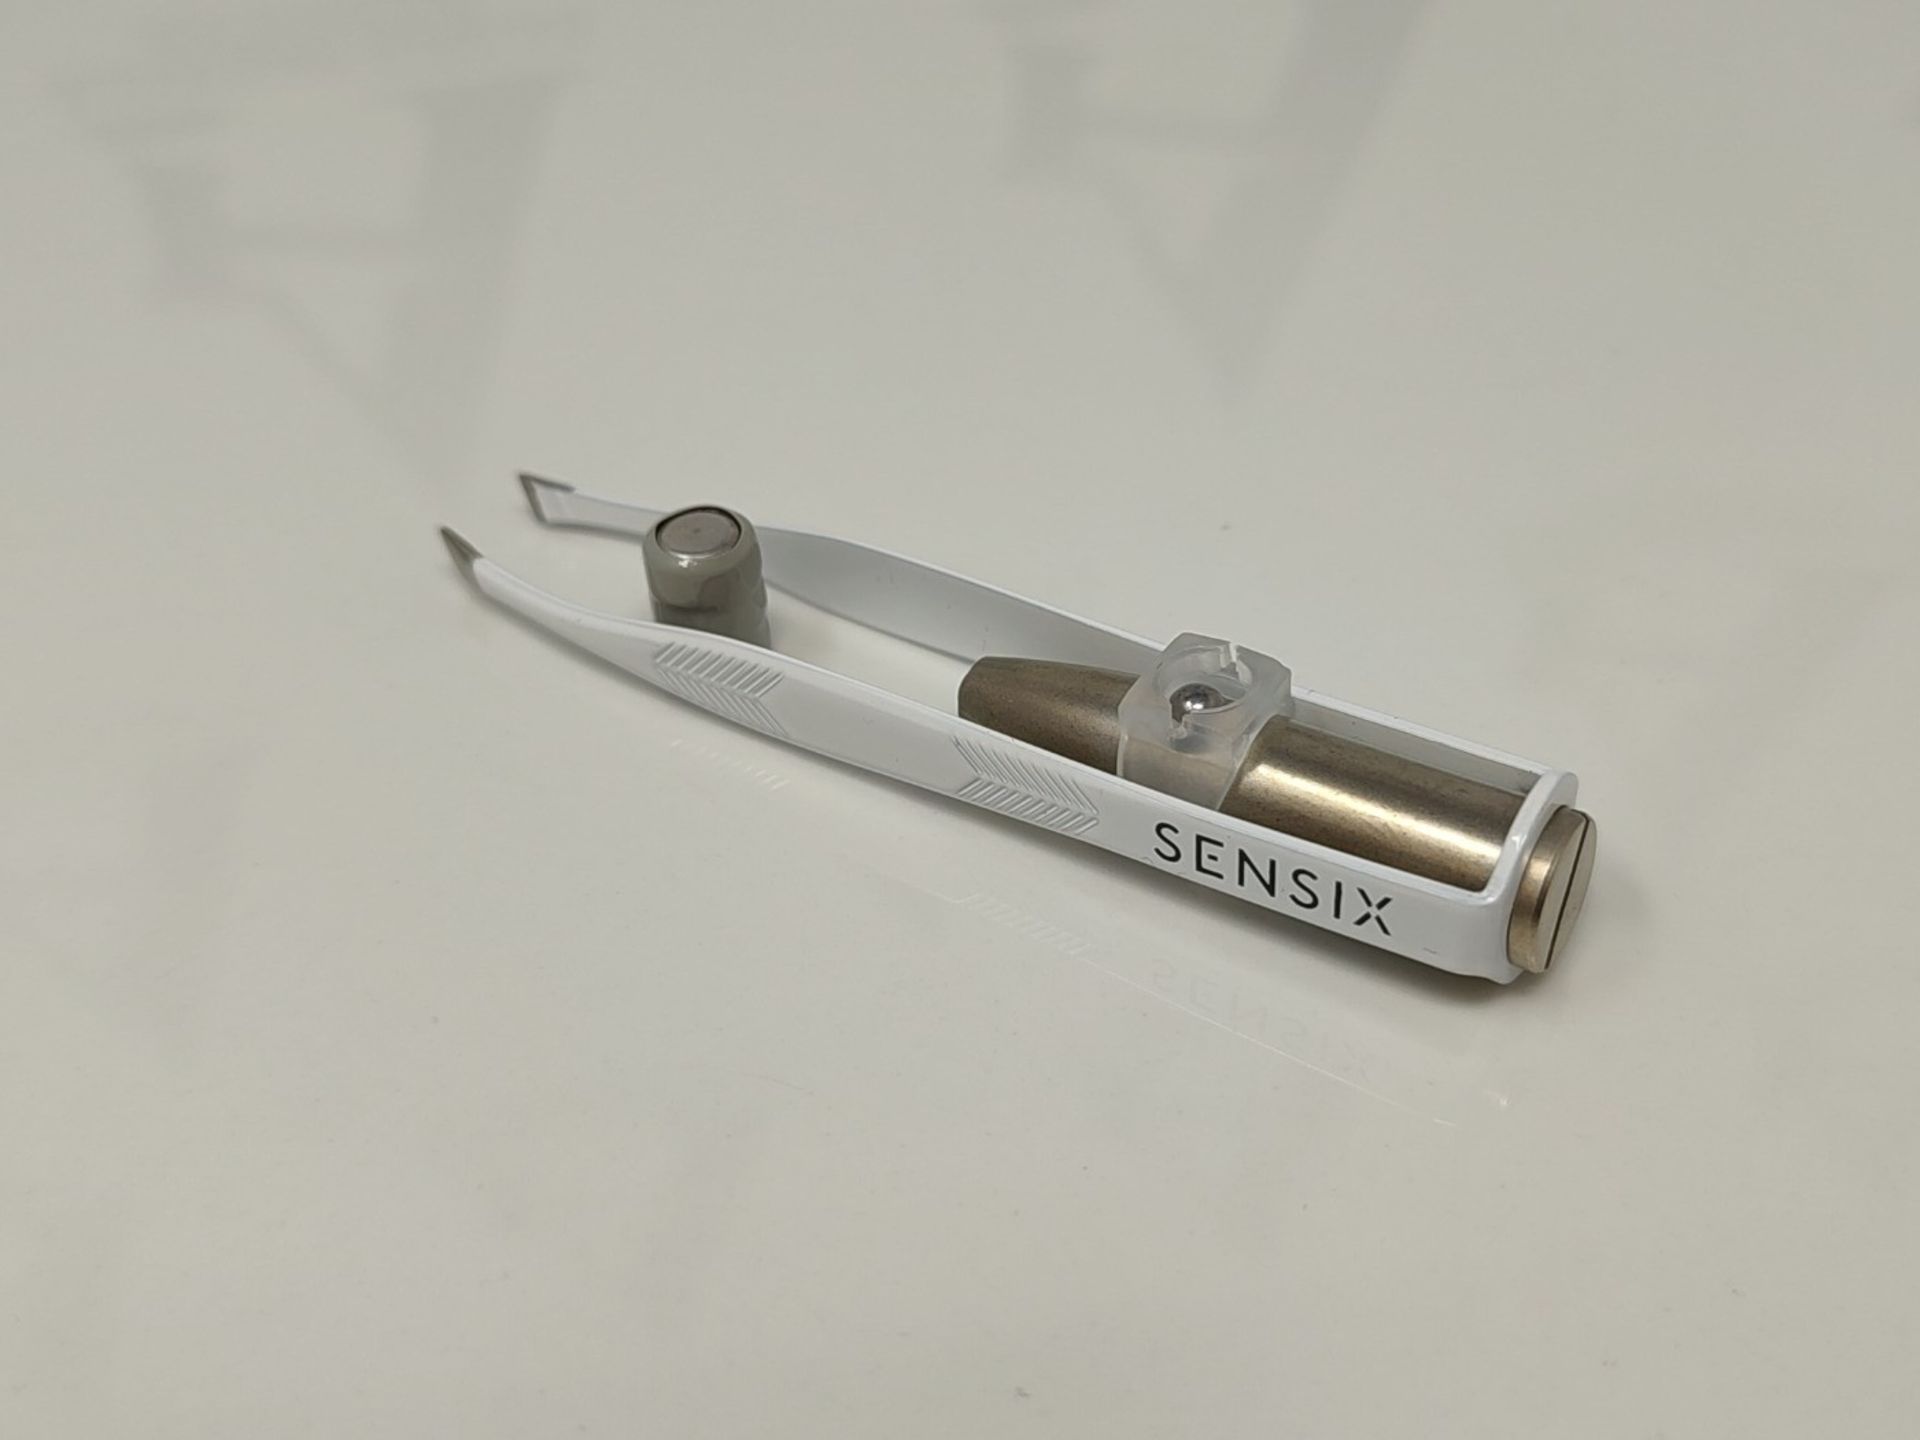 Sensica Tweezers with Led Light - Professional Precision Stainless-Steel Slant Tip Twe - Image 2 of 2